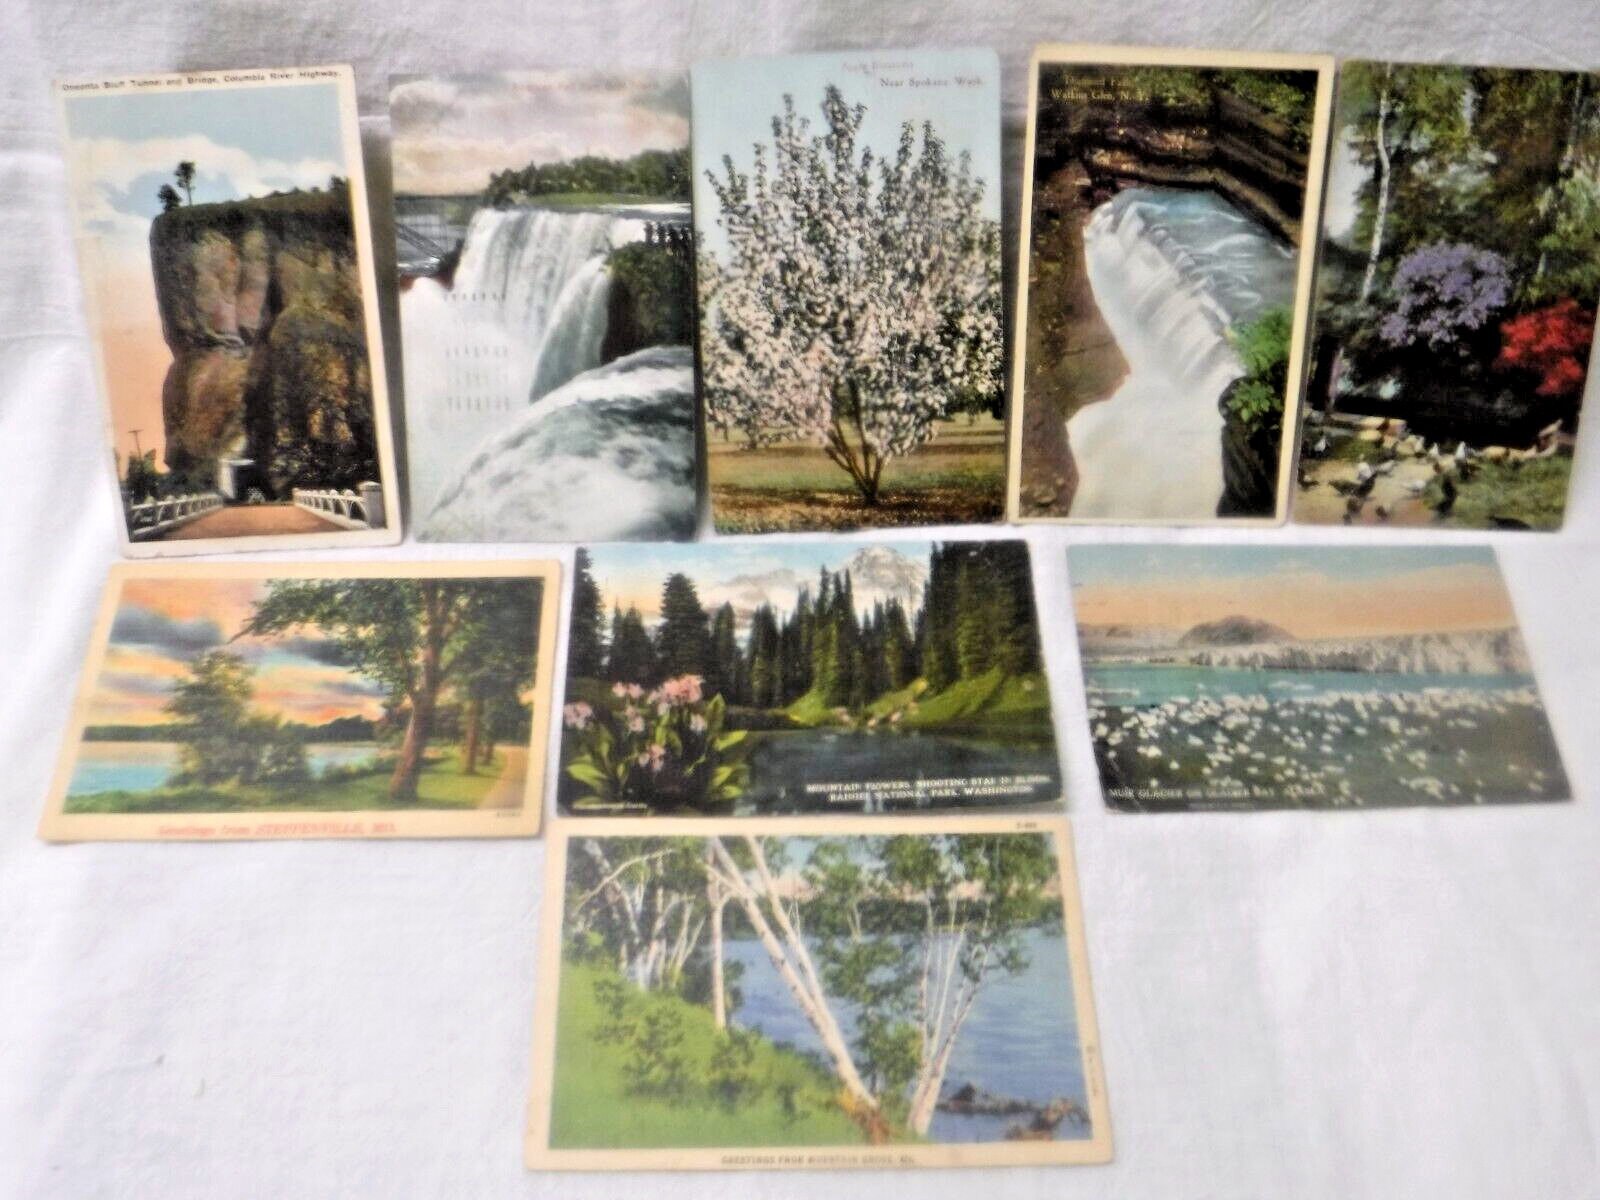 7 ANTIQUE 2 VTG POSTCARDS Scenery WA, MO, Canada, AK, OR, NY Stamped Messages